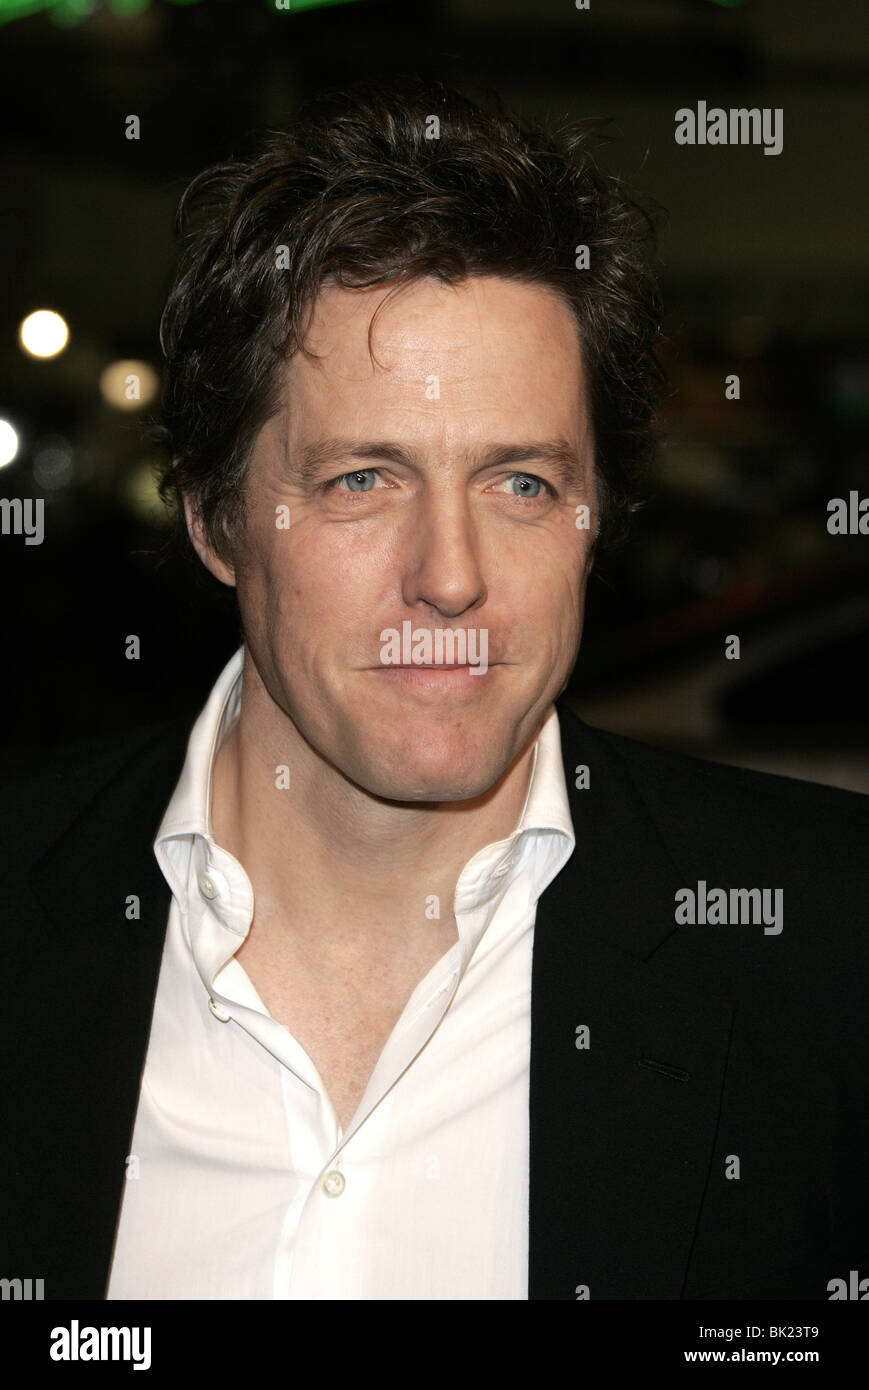 HUGH GRANT Musik und SONGTEXTE LOS ANGELES PREMIERE GRAUMANS CHINESE THEATRE HOLLYWOOD LOS ANGELES USA 7. Februar 2007 Stockfoto